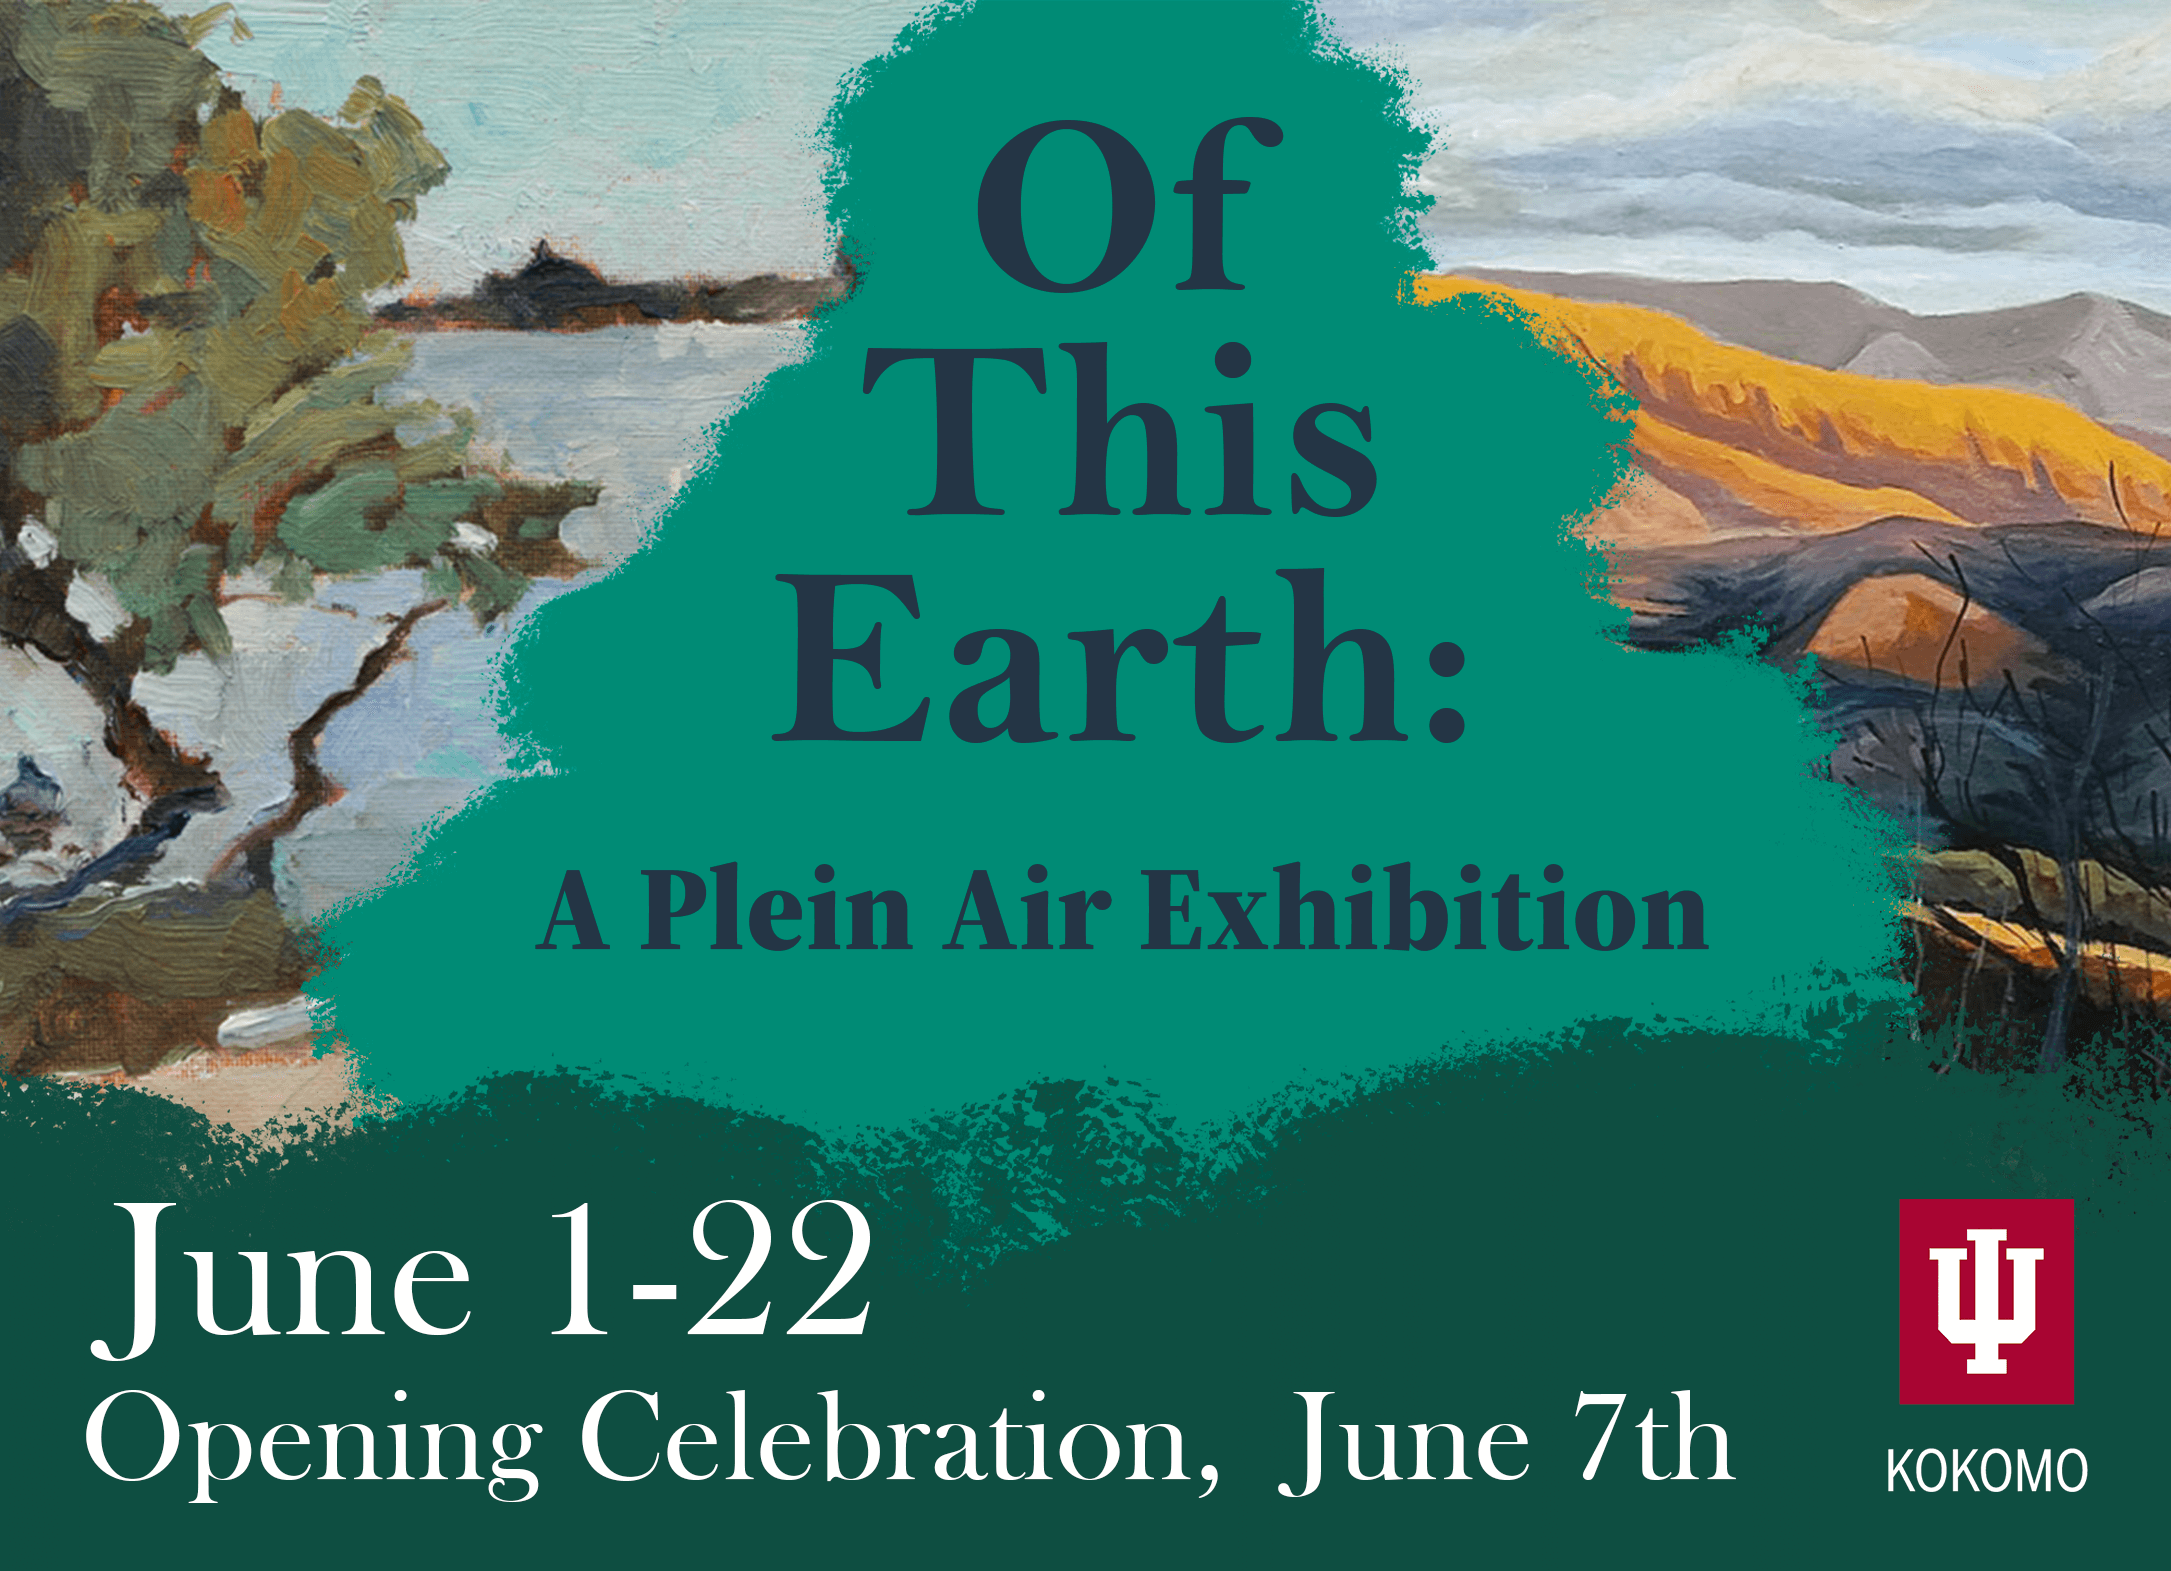 Of This Earth: A Plein Air Exhibition. Showcasing June 1st to 22nd. Opening celebration held on June 7th.